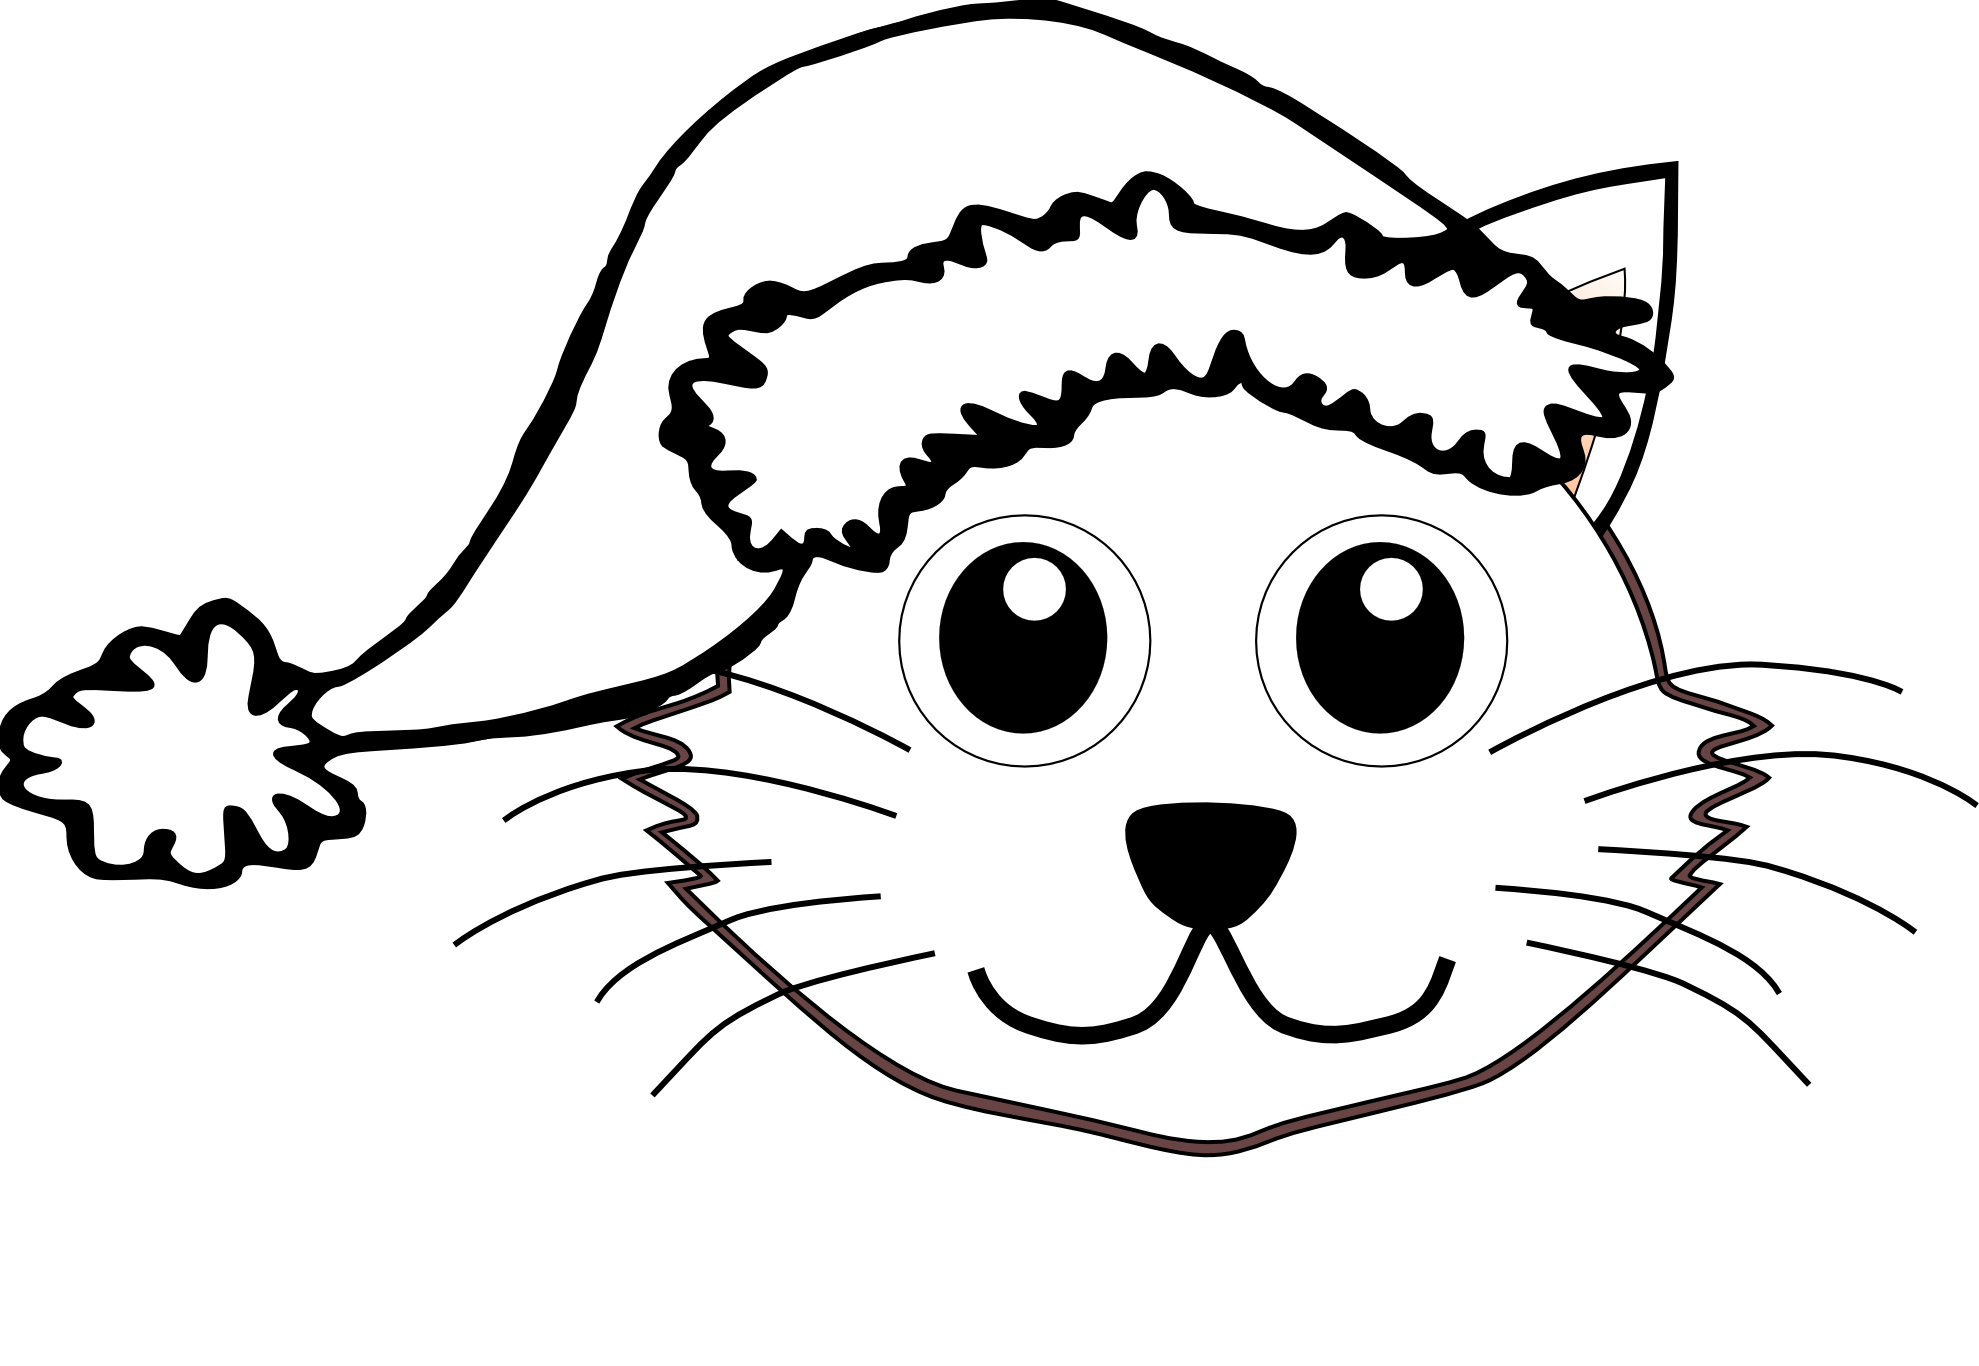 Pirate hat black and. Dogs clipart xmas